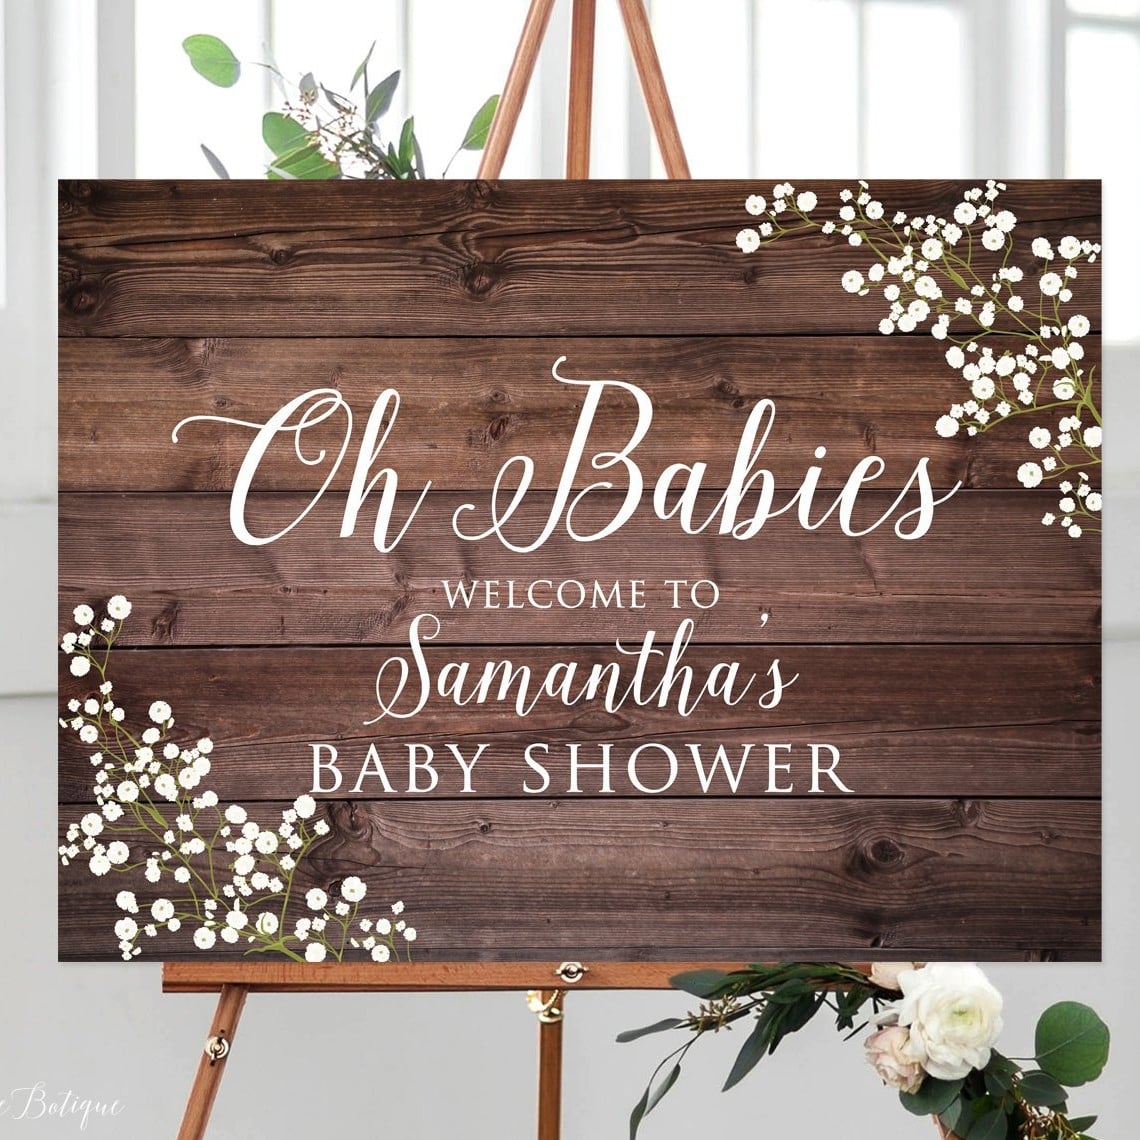 Twin Baby Shower Theme Ideas | vlr.eng.br